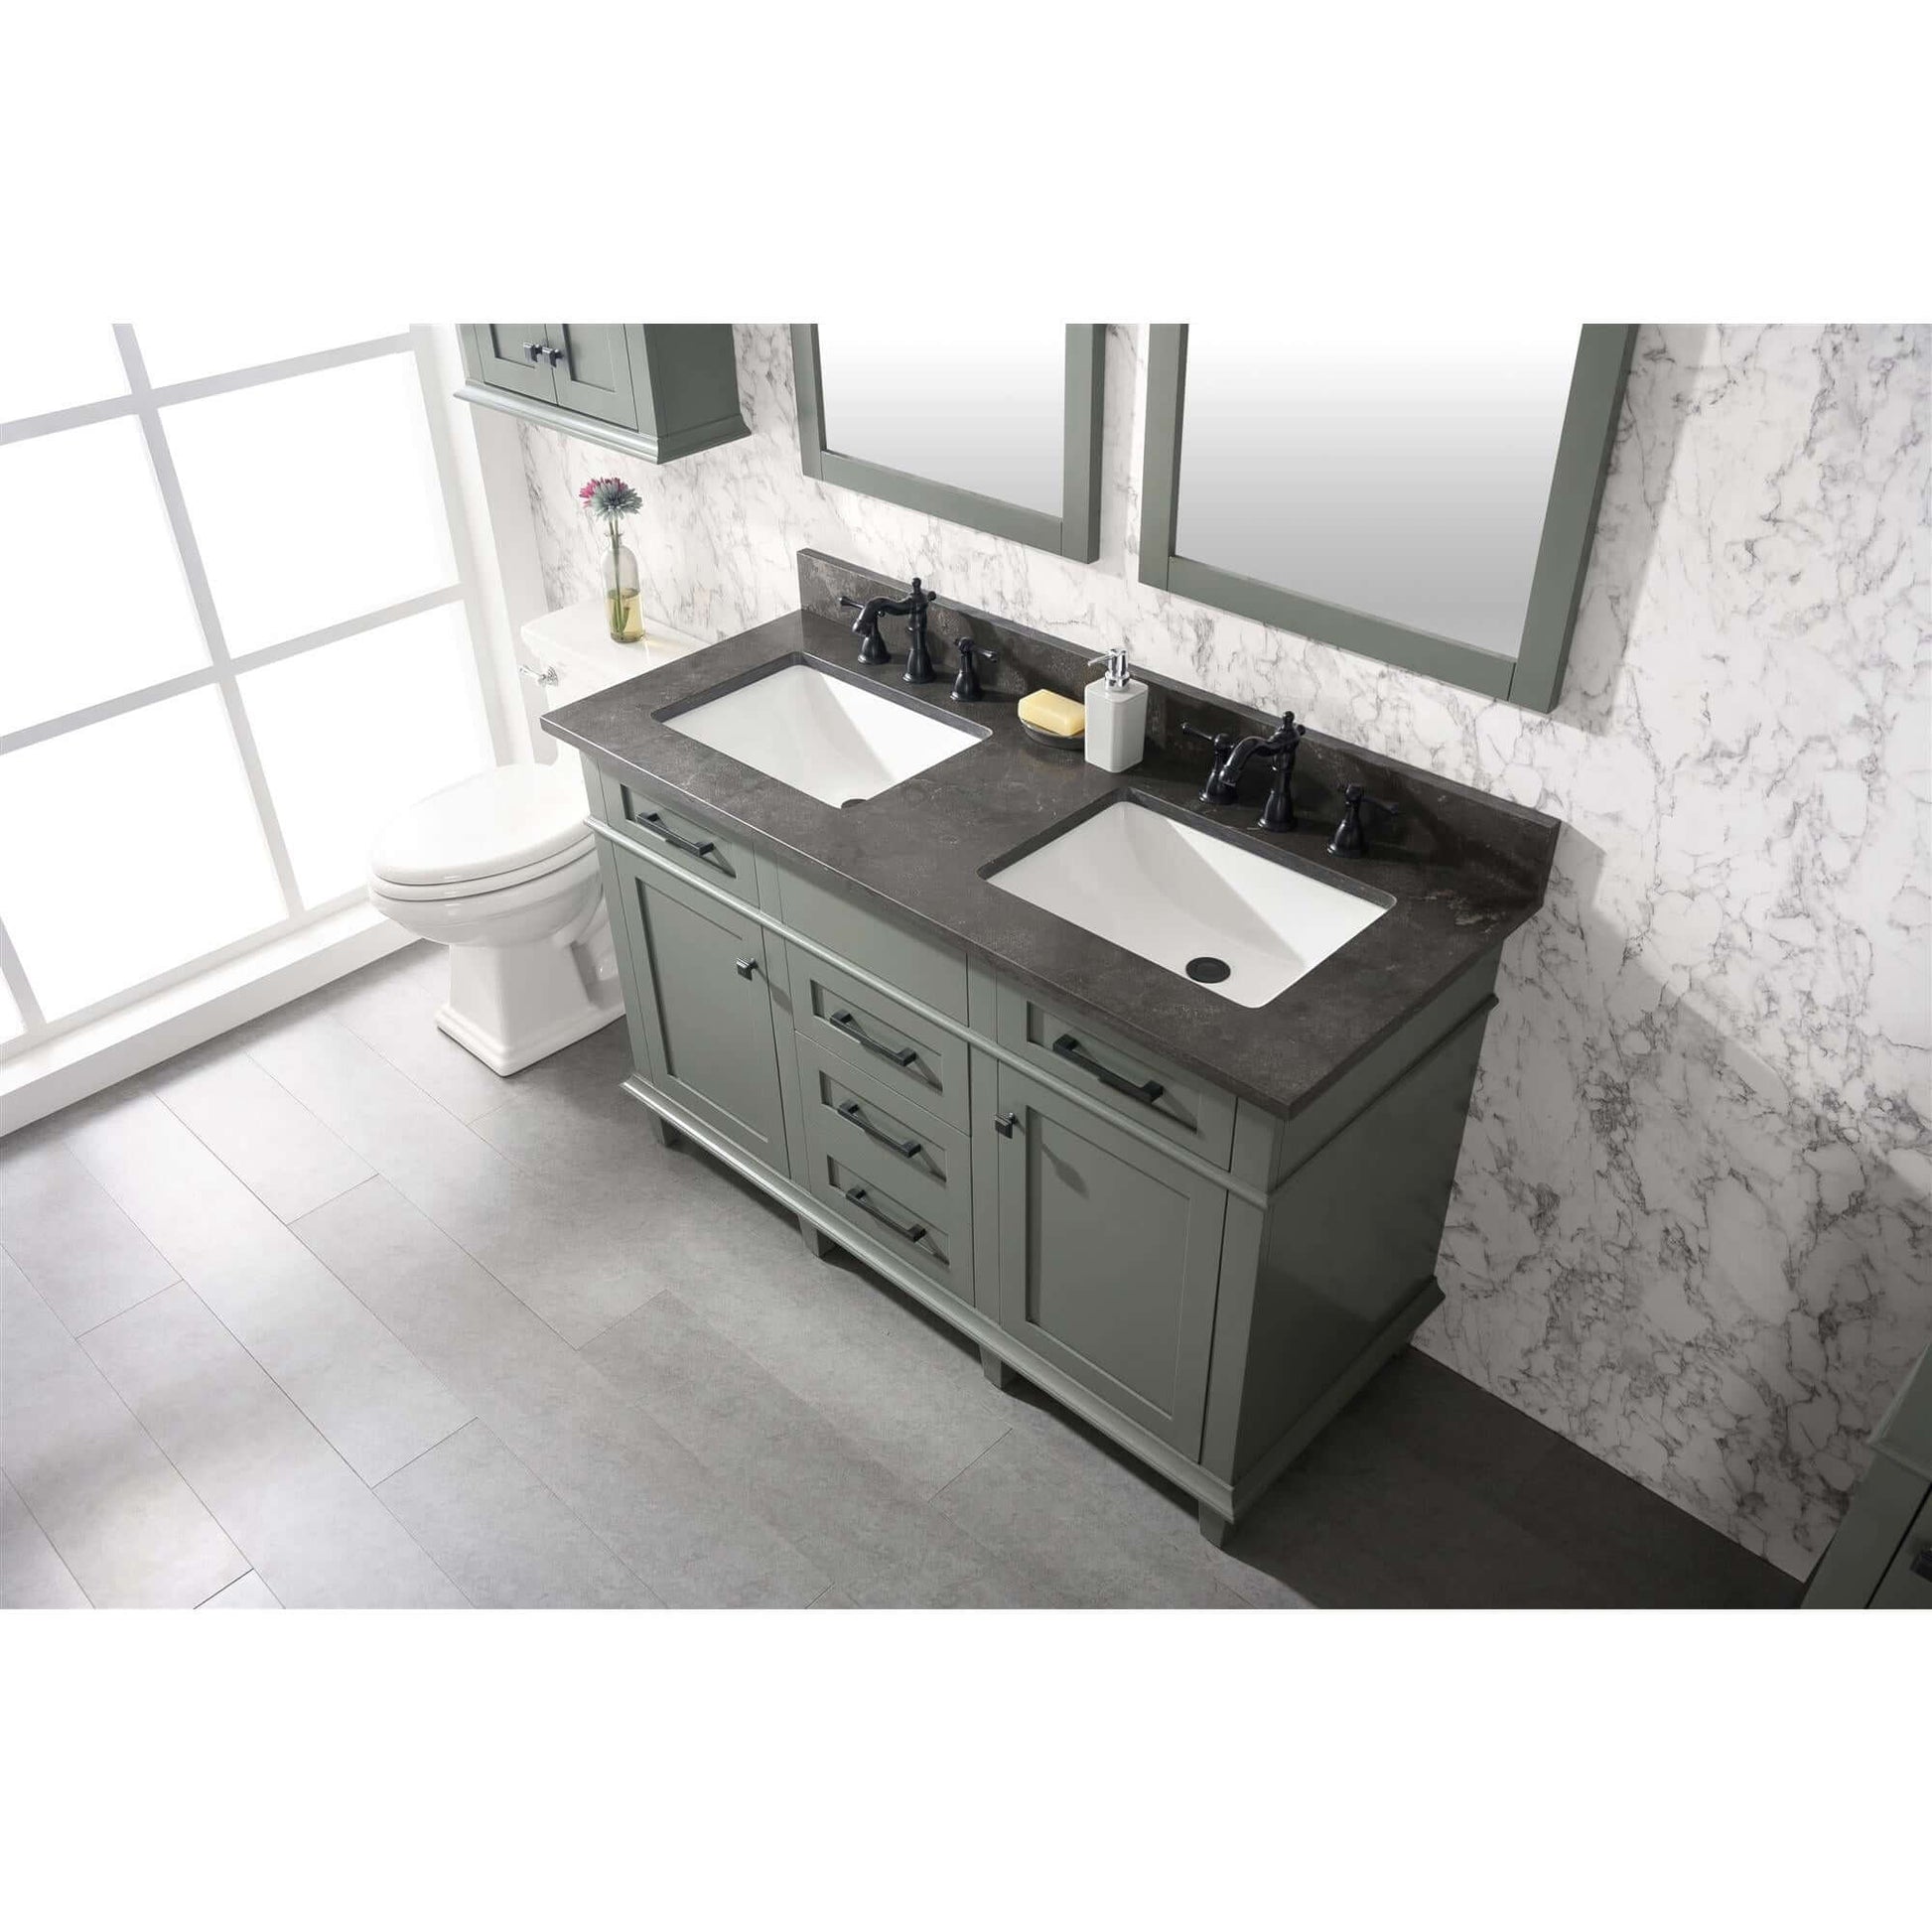 54" Pewter Green Finish Double Sink Vanity Cabinet With Blue Lime Stone Top - WLF2254-PG